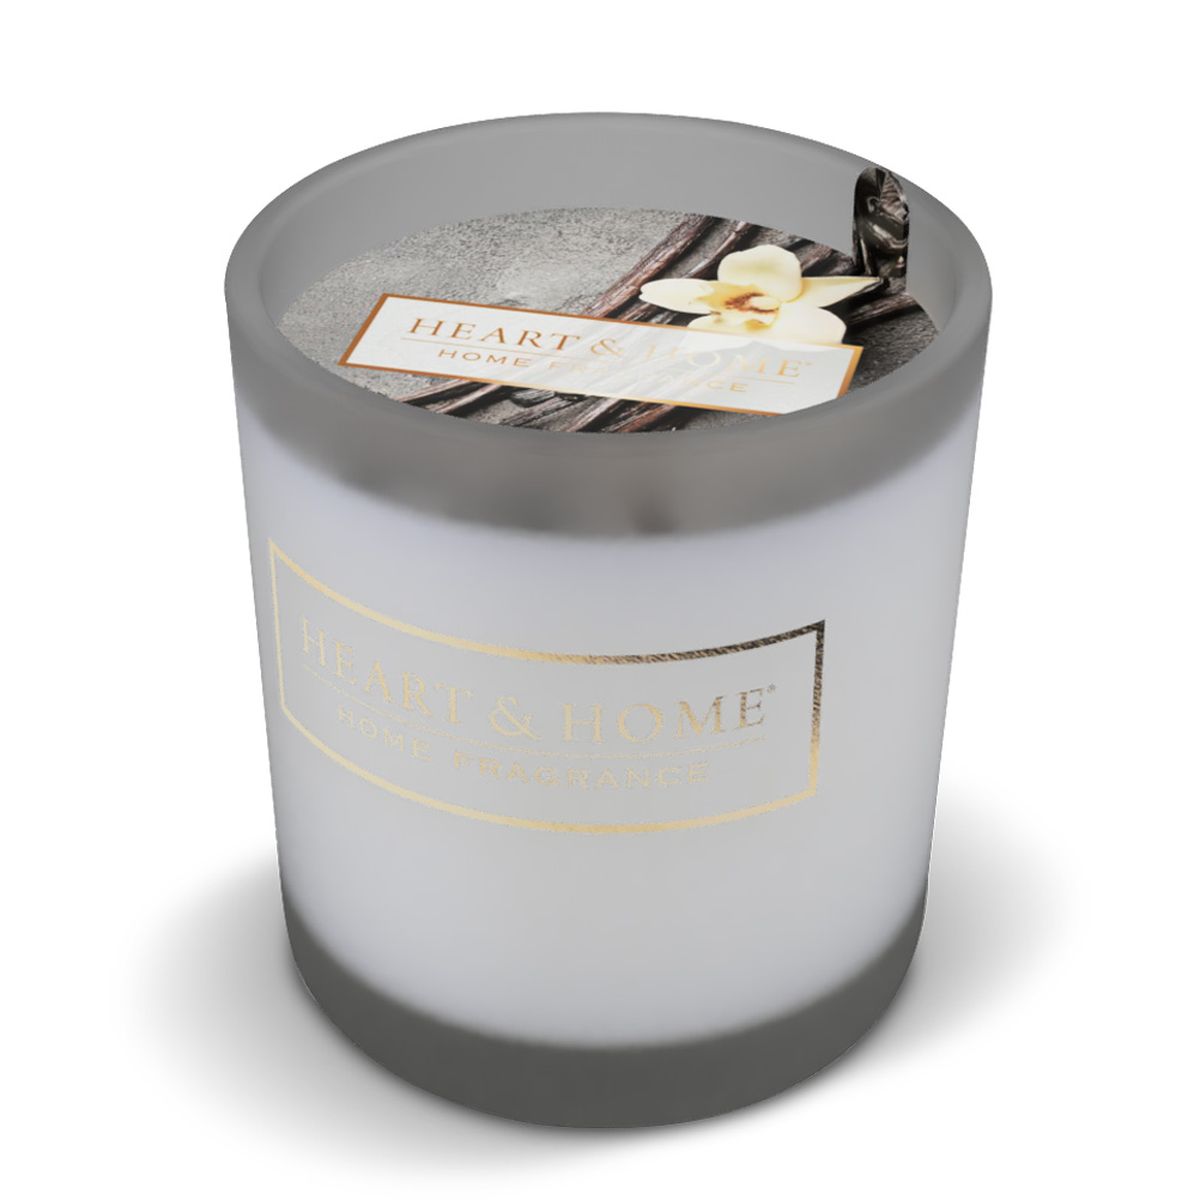 Bougie Votive Heart and Home 15 heures - Vanille Noire